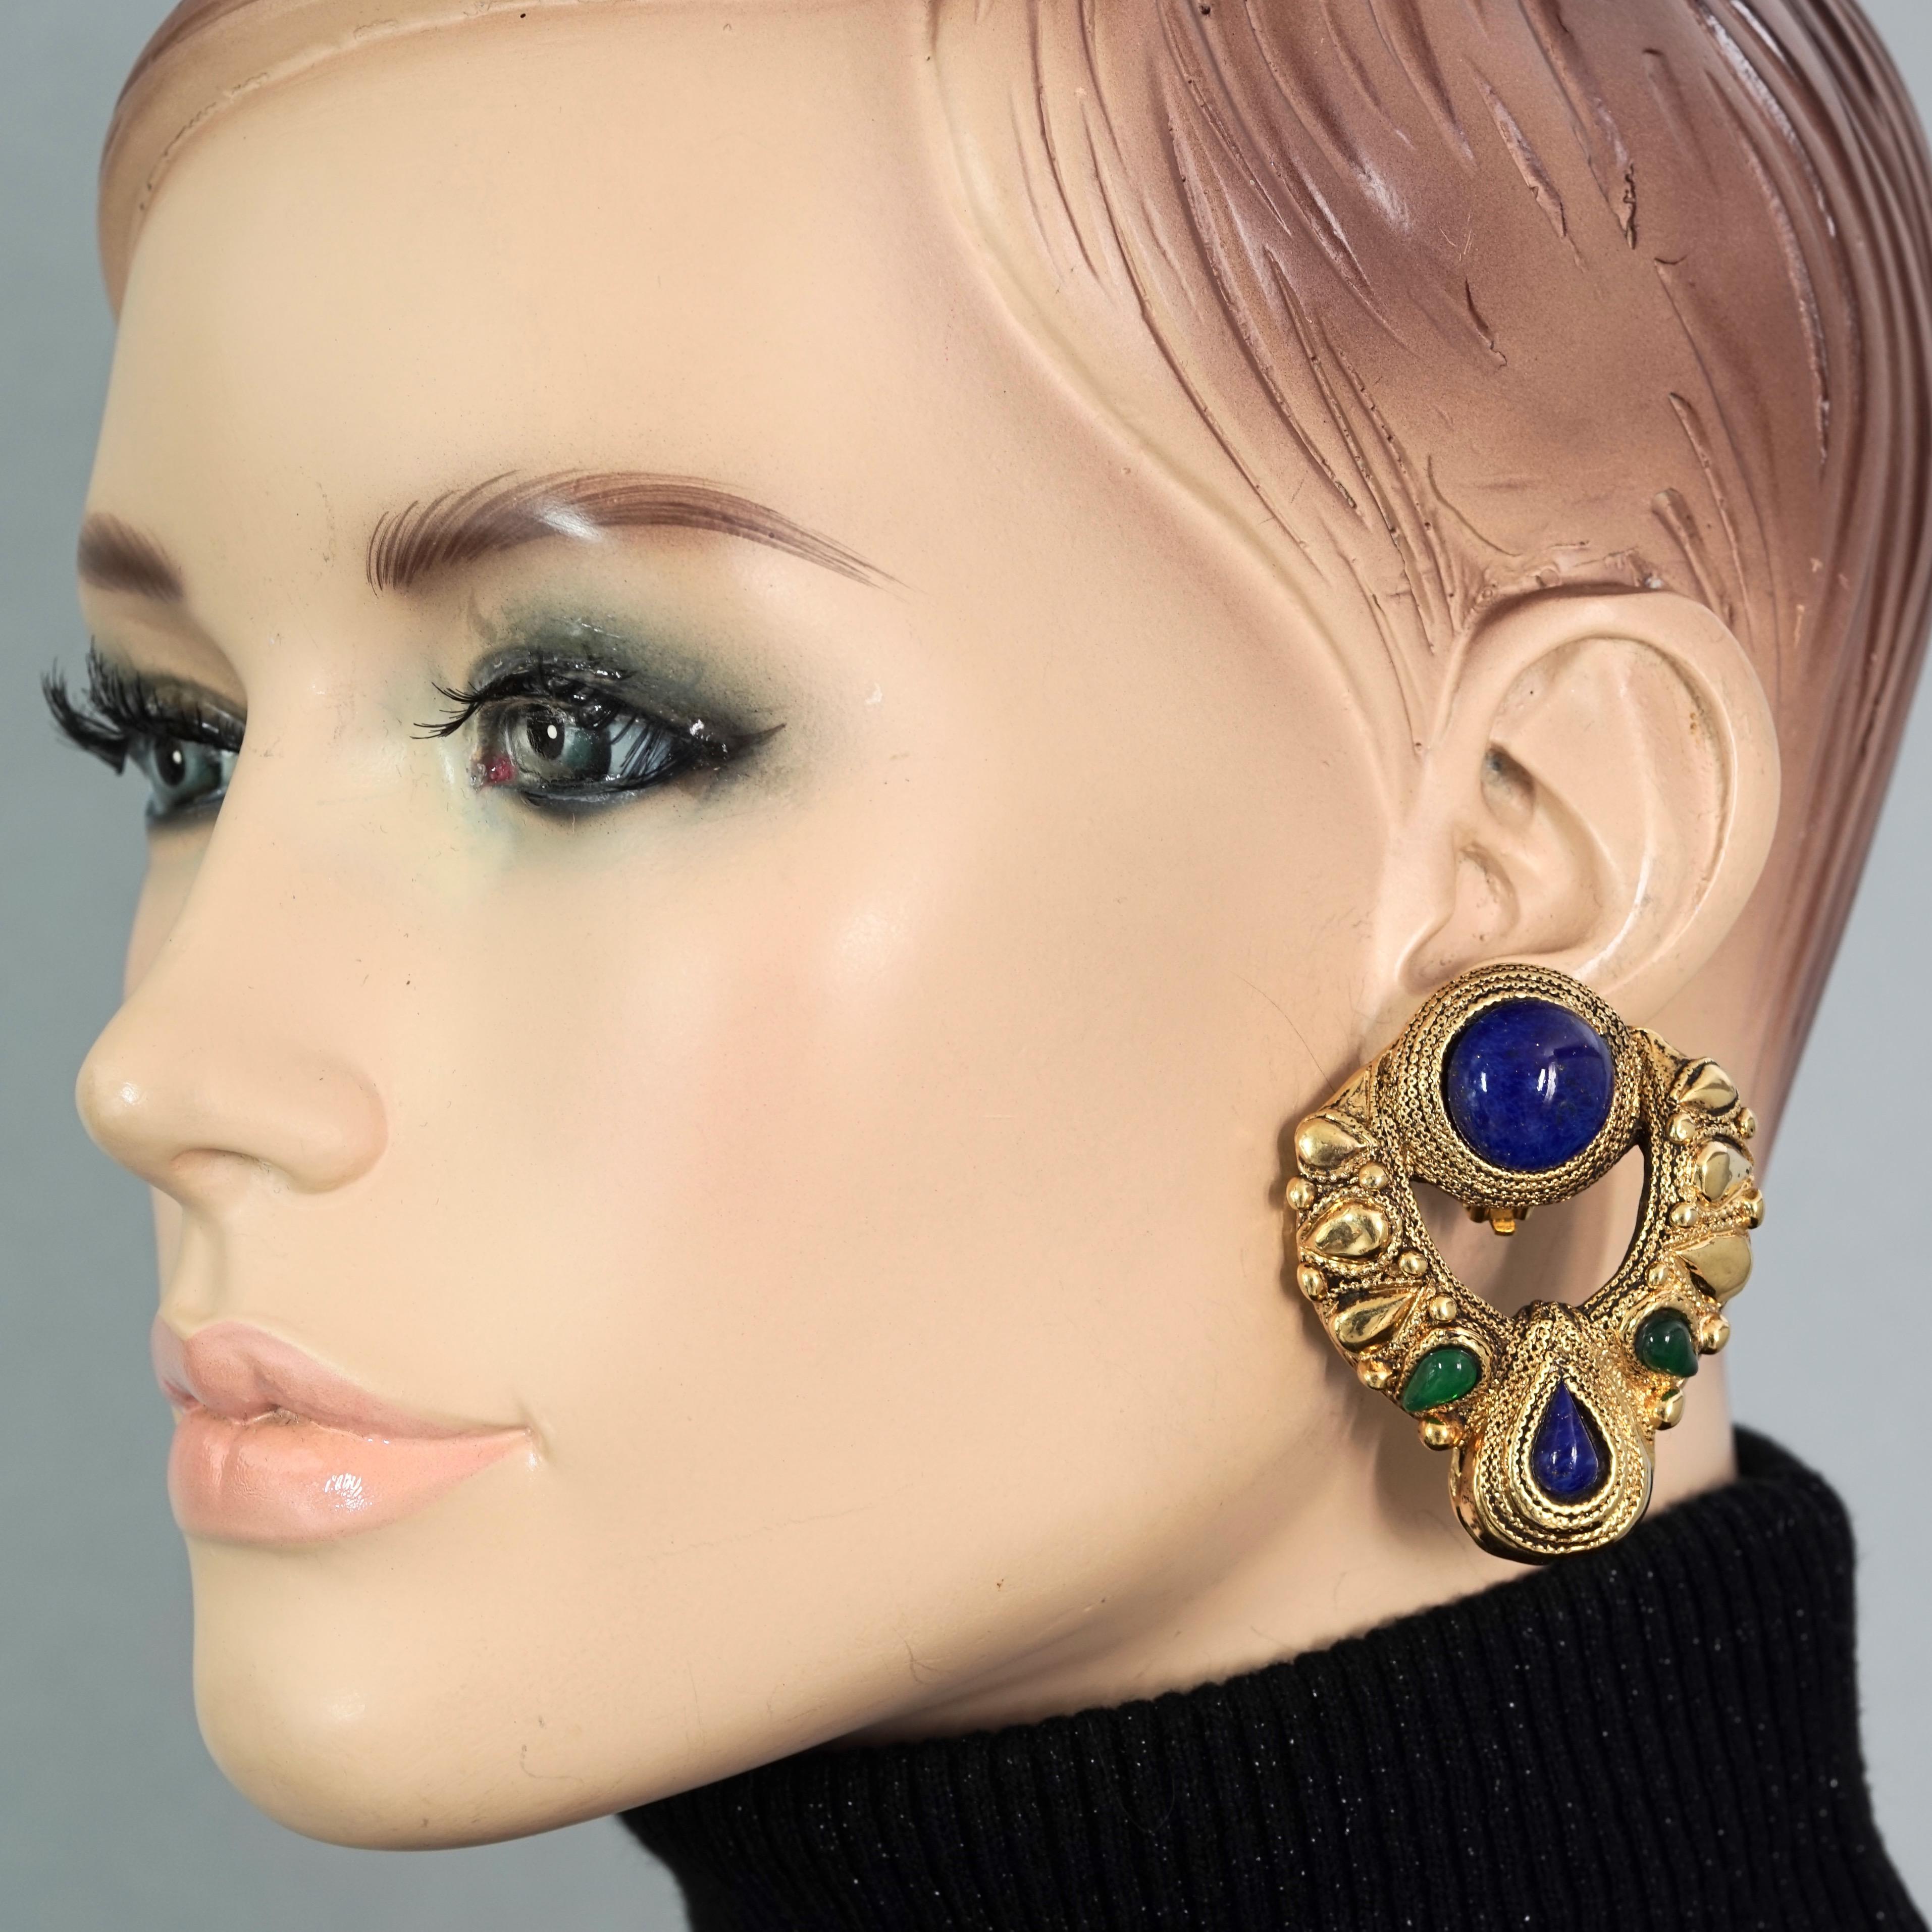 Vintage Massive CLAIRE DEVE Jewelled Door Knocker Earrings

Measurements:
Height: 2.12 inches (5.4 cm)
Width: 1.73 inches (4.4 cm)
Weight per Earring: 19 grams

Features:
- 100% Authentic CLAIRE DEVE.
- Massive jewelled door knocker earrings with